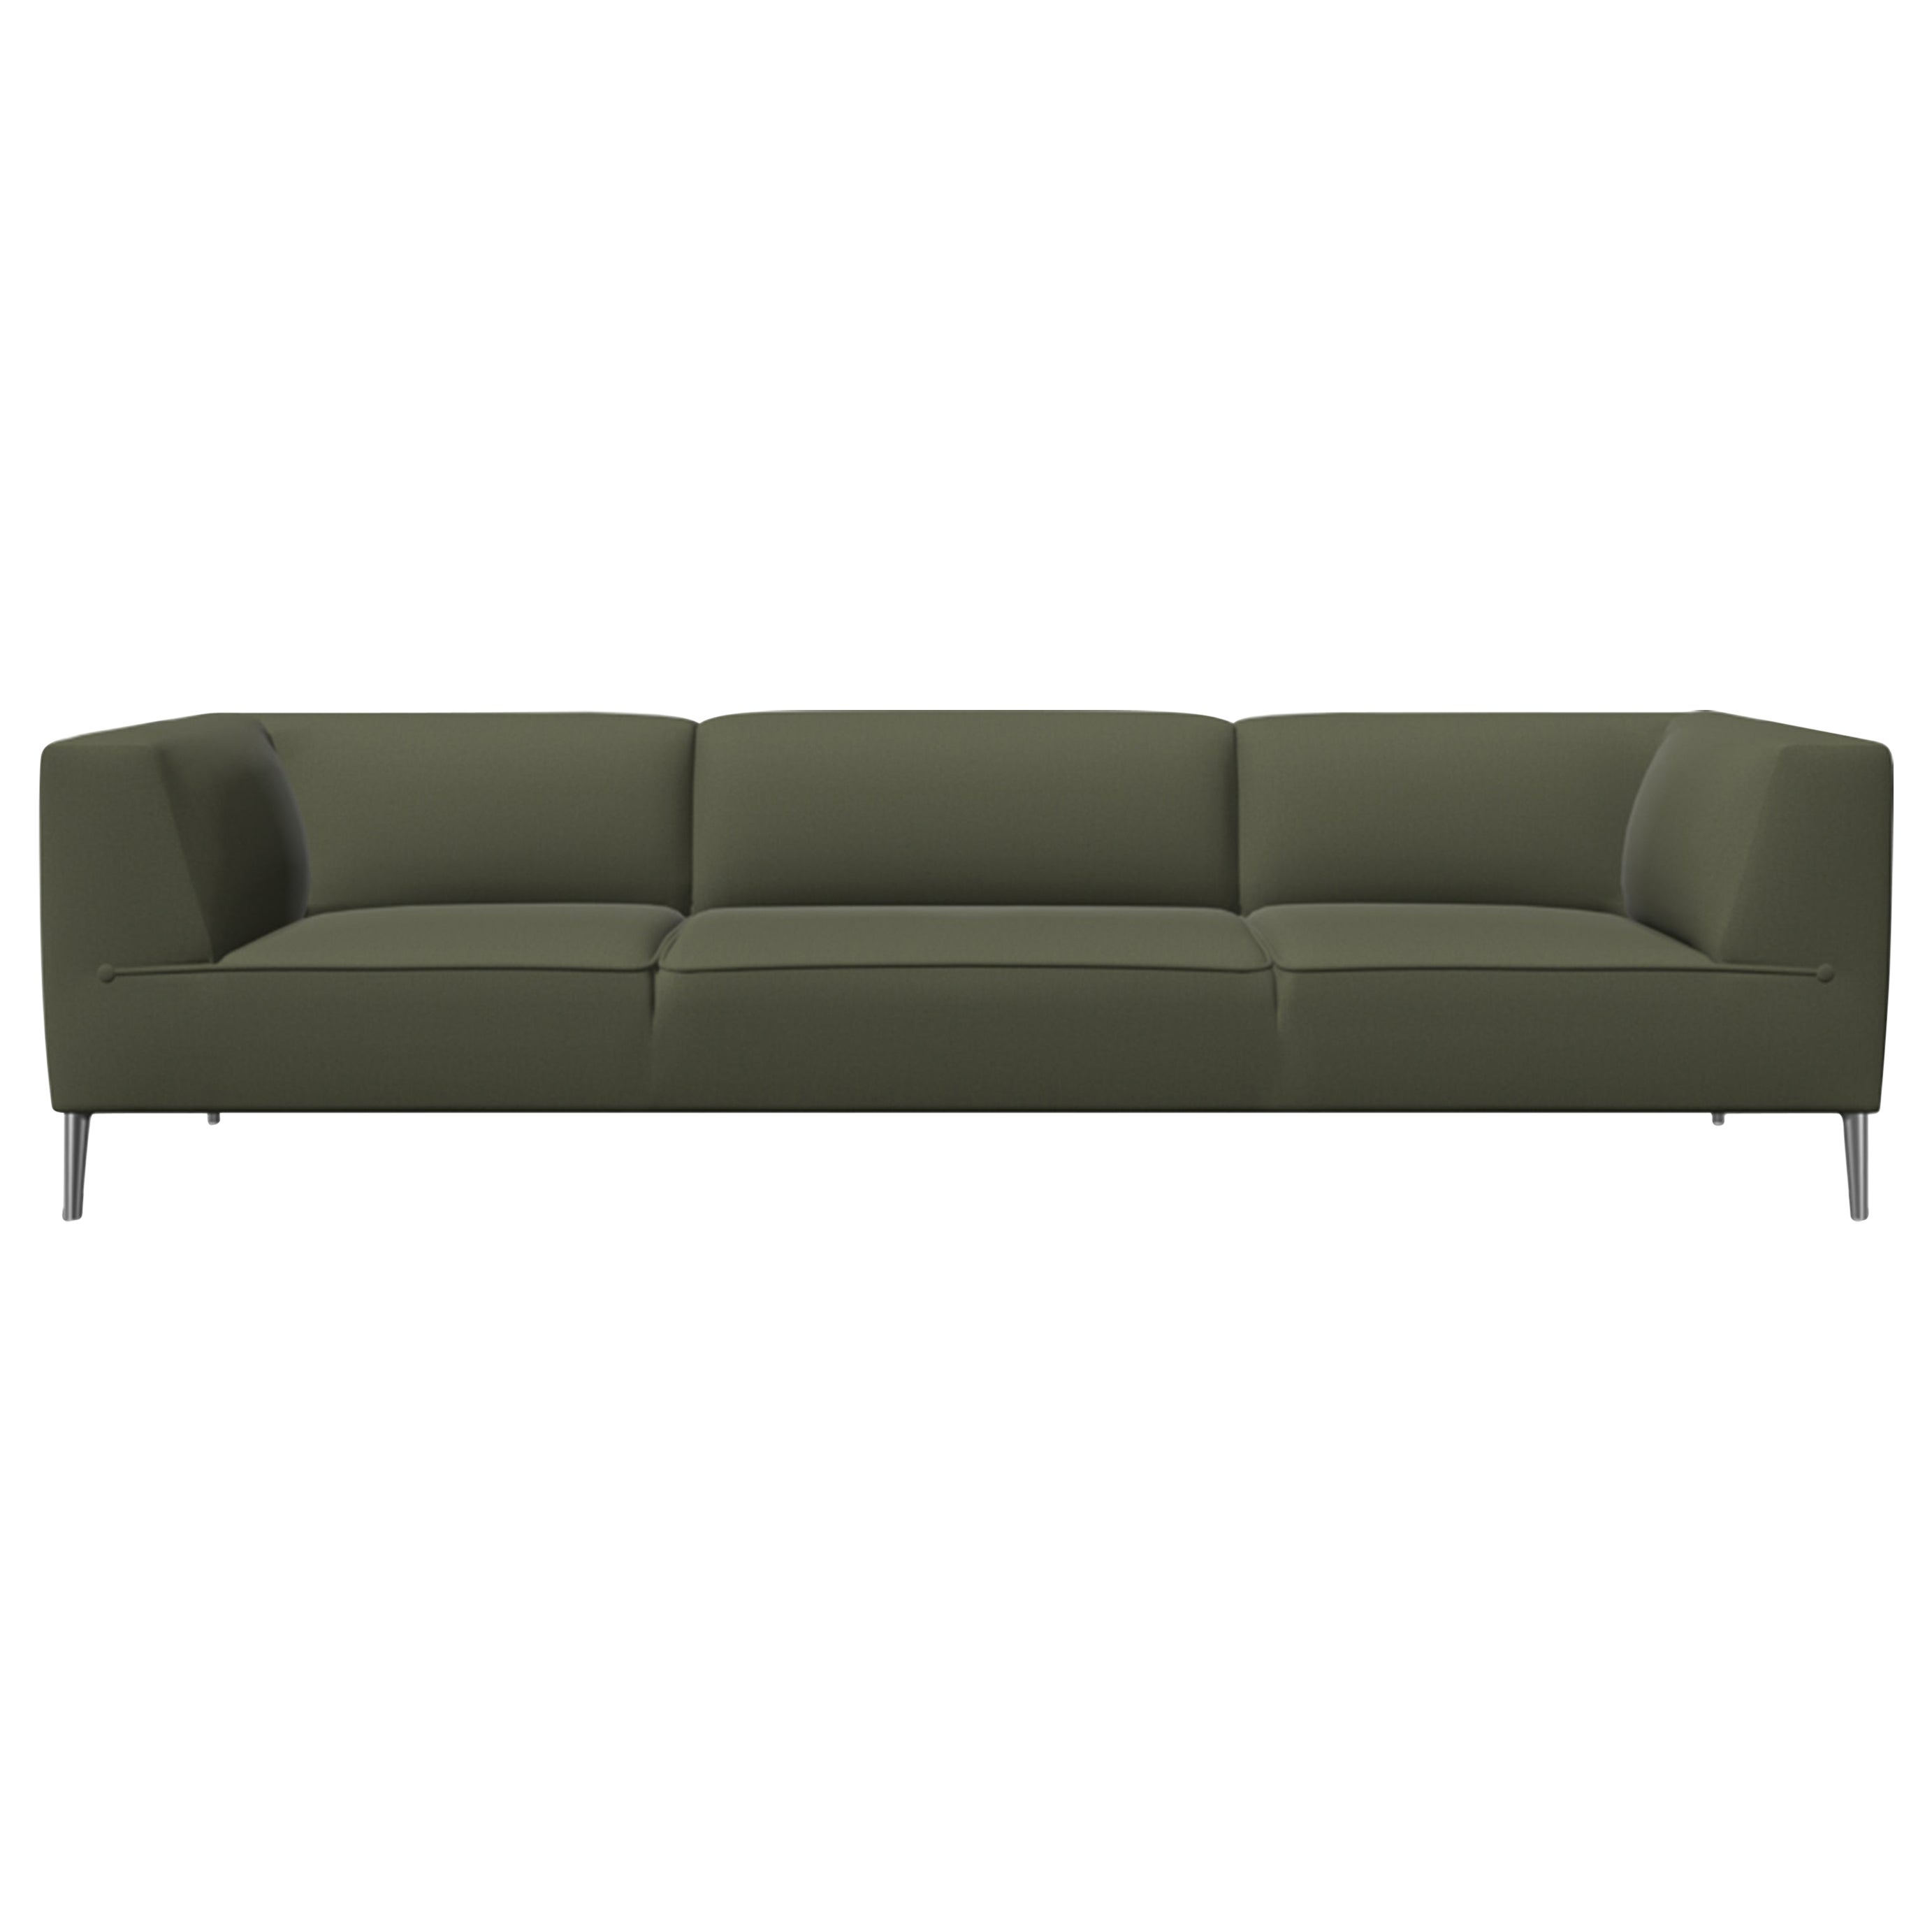 Moooi Triple Seat Sofa So Good in Alge Upholstery with Polished Aluminum Feet For Sale